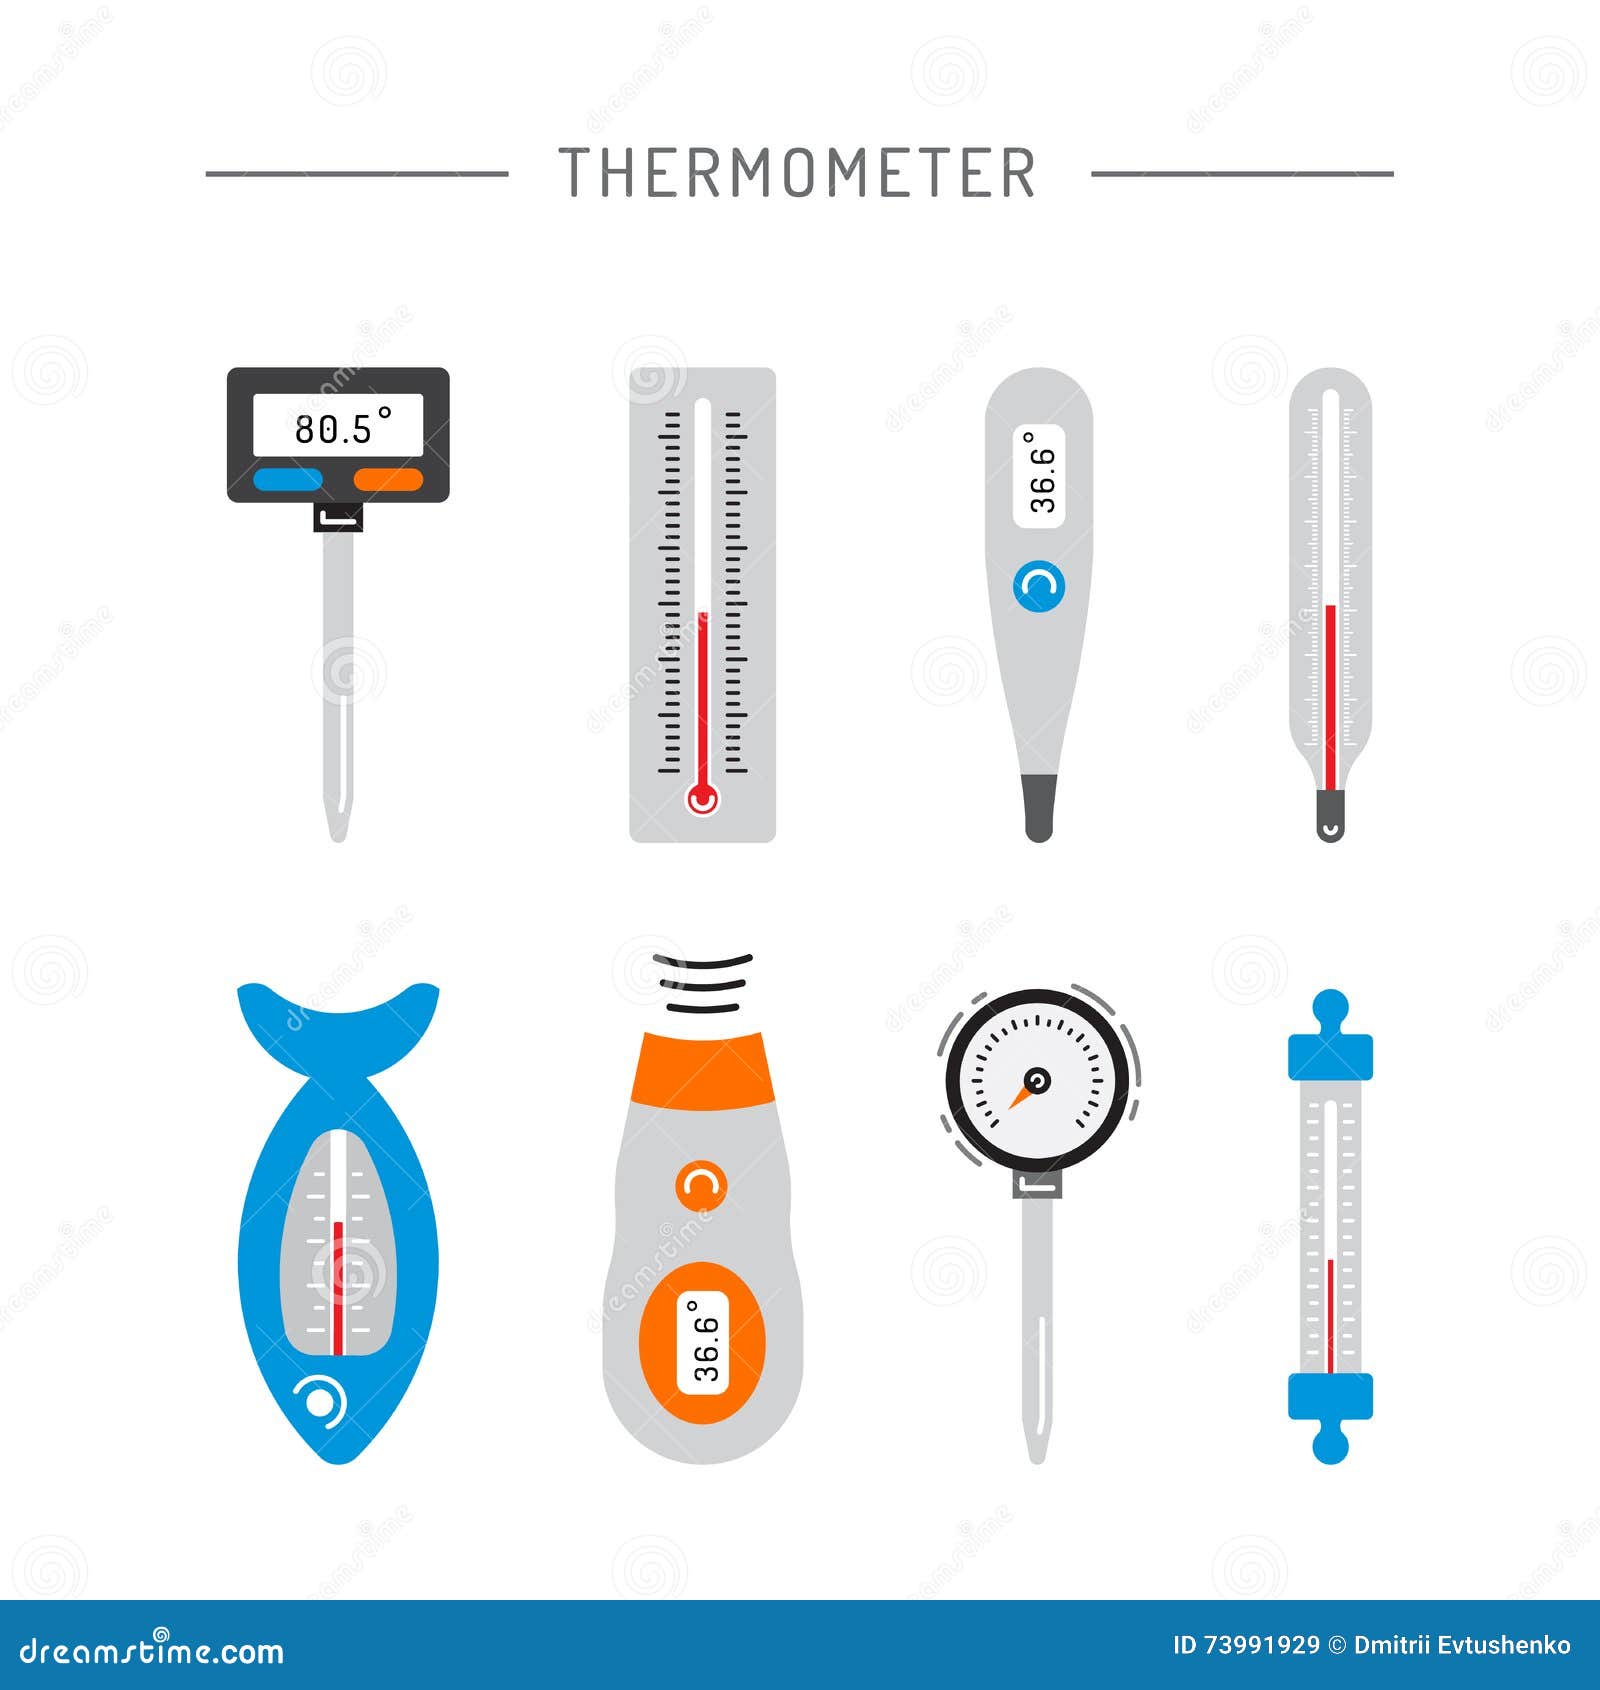 https://thumbs.dreamstime.com/z/image-thermometer-icons-drawn-linear-style-device-measuring-temperature-various-types-electronic-thermometers-73991929.jpg